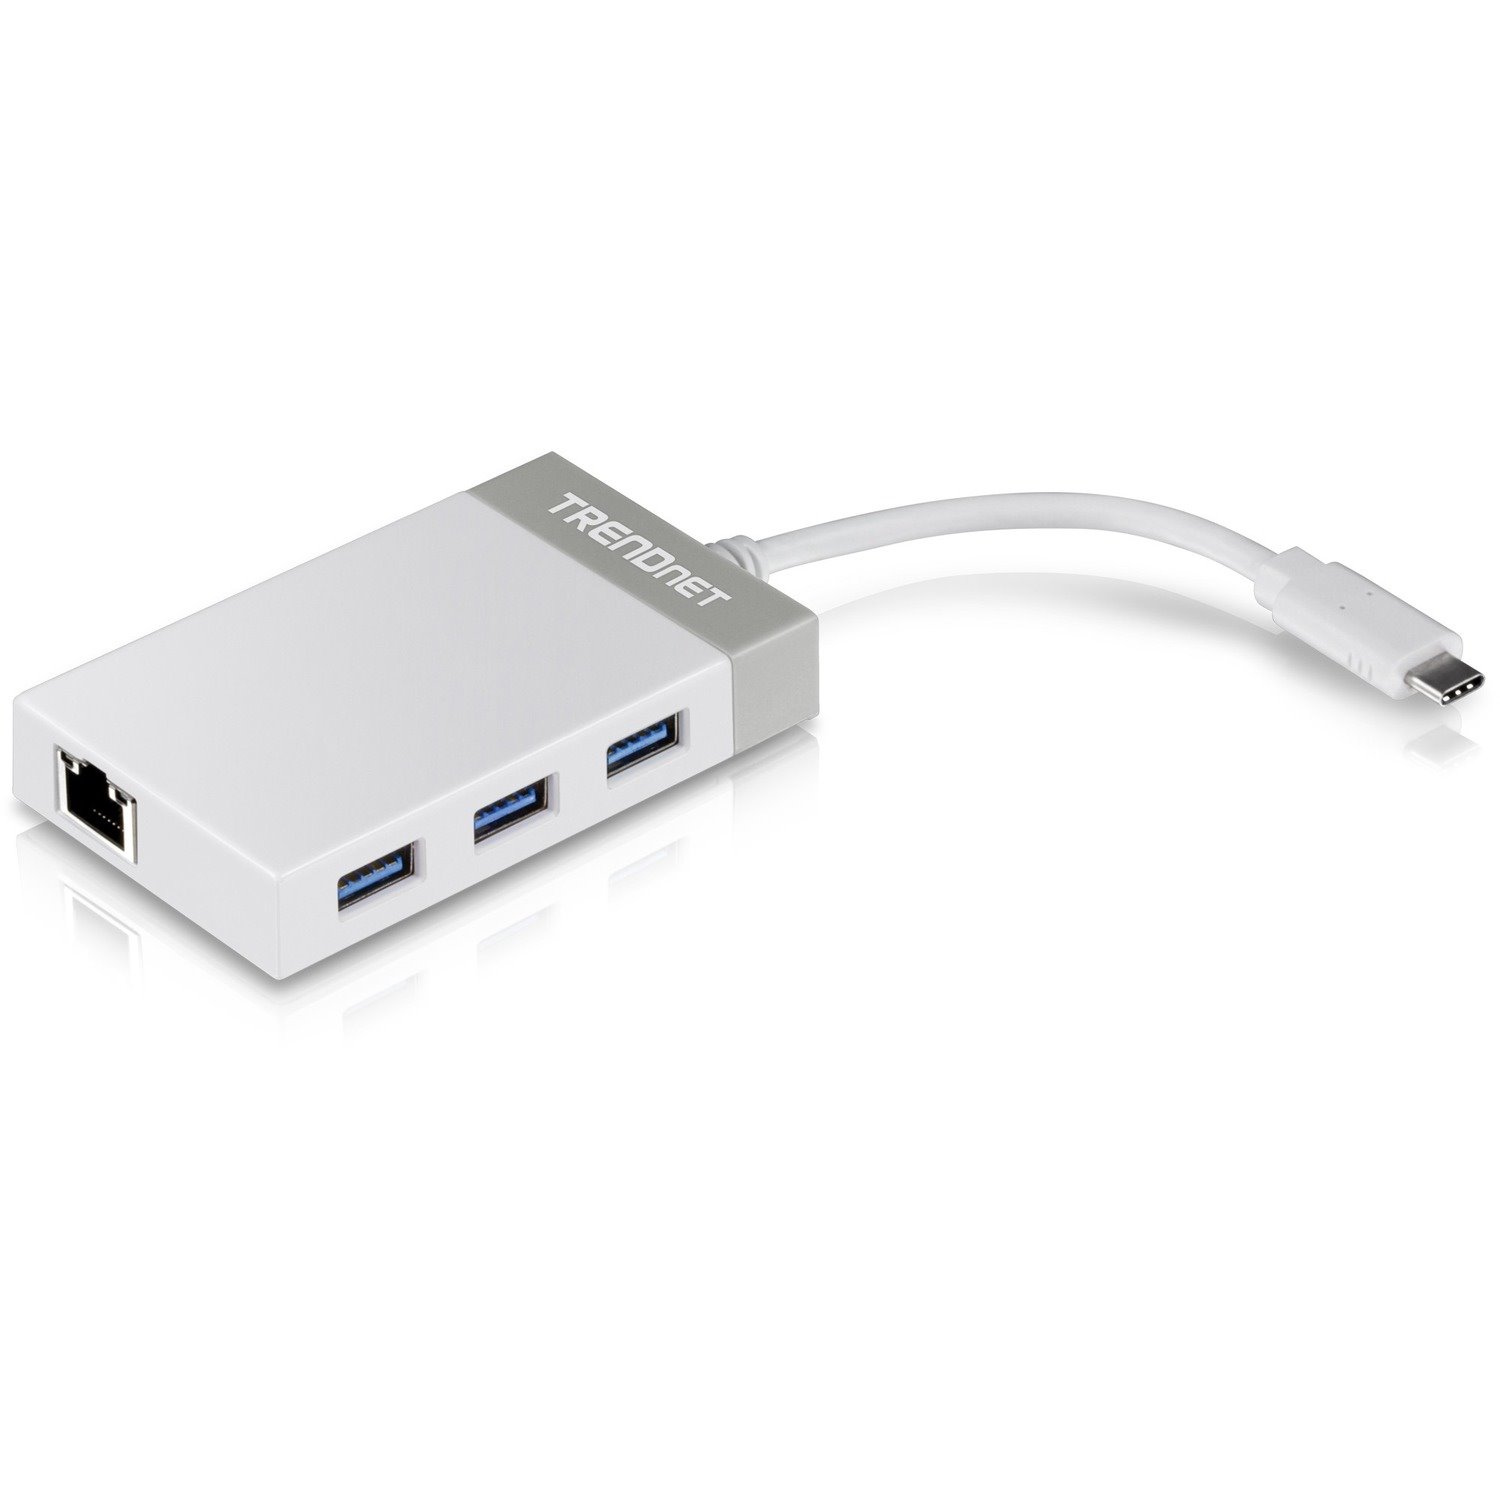 TRENDnet USB-C to Gigabit Adapter Hub, 12.7 cm (5) for Windows, Mac OS, MacBook and Surface Pro, TUC-ETGH3